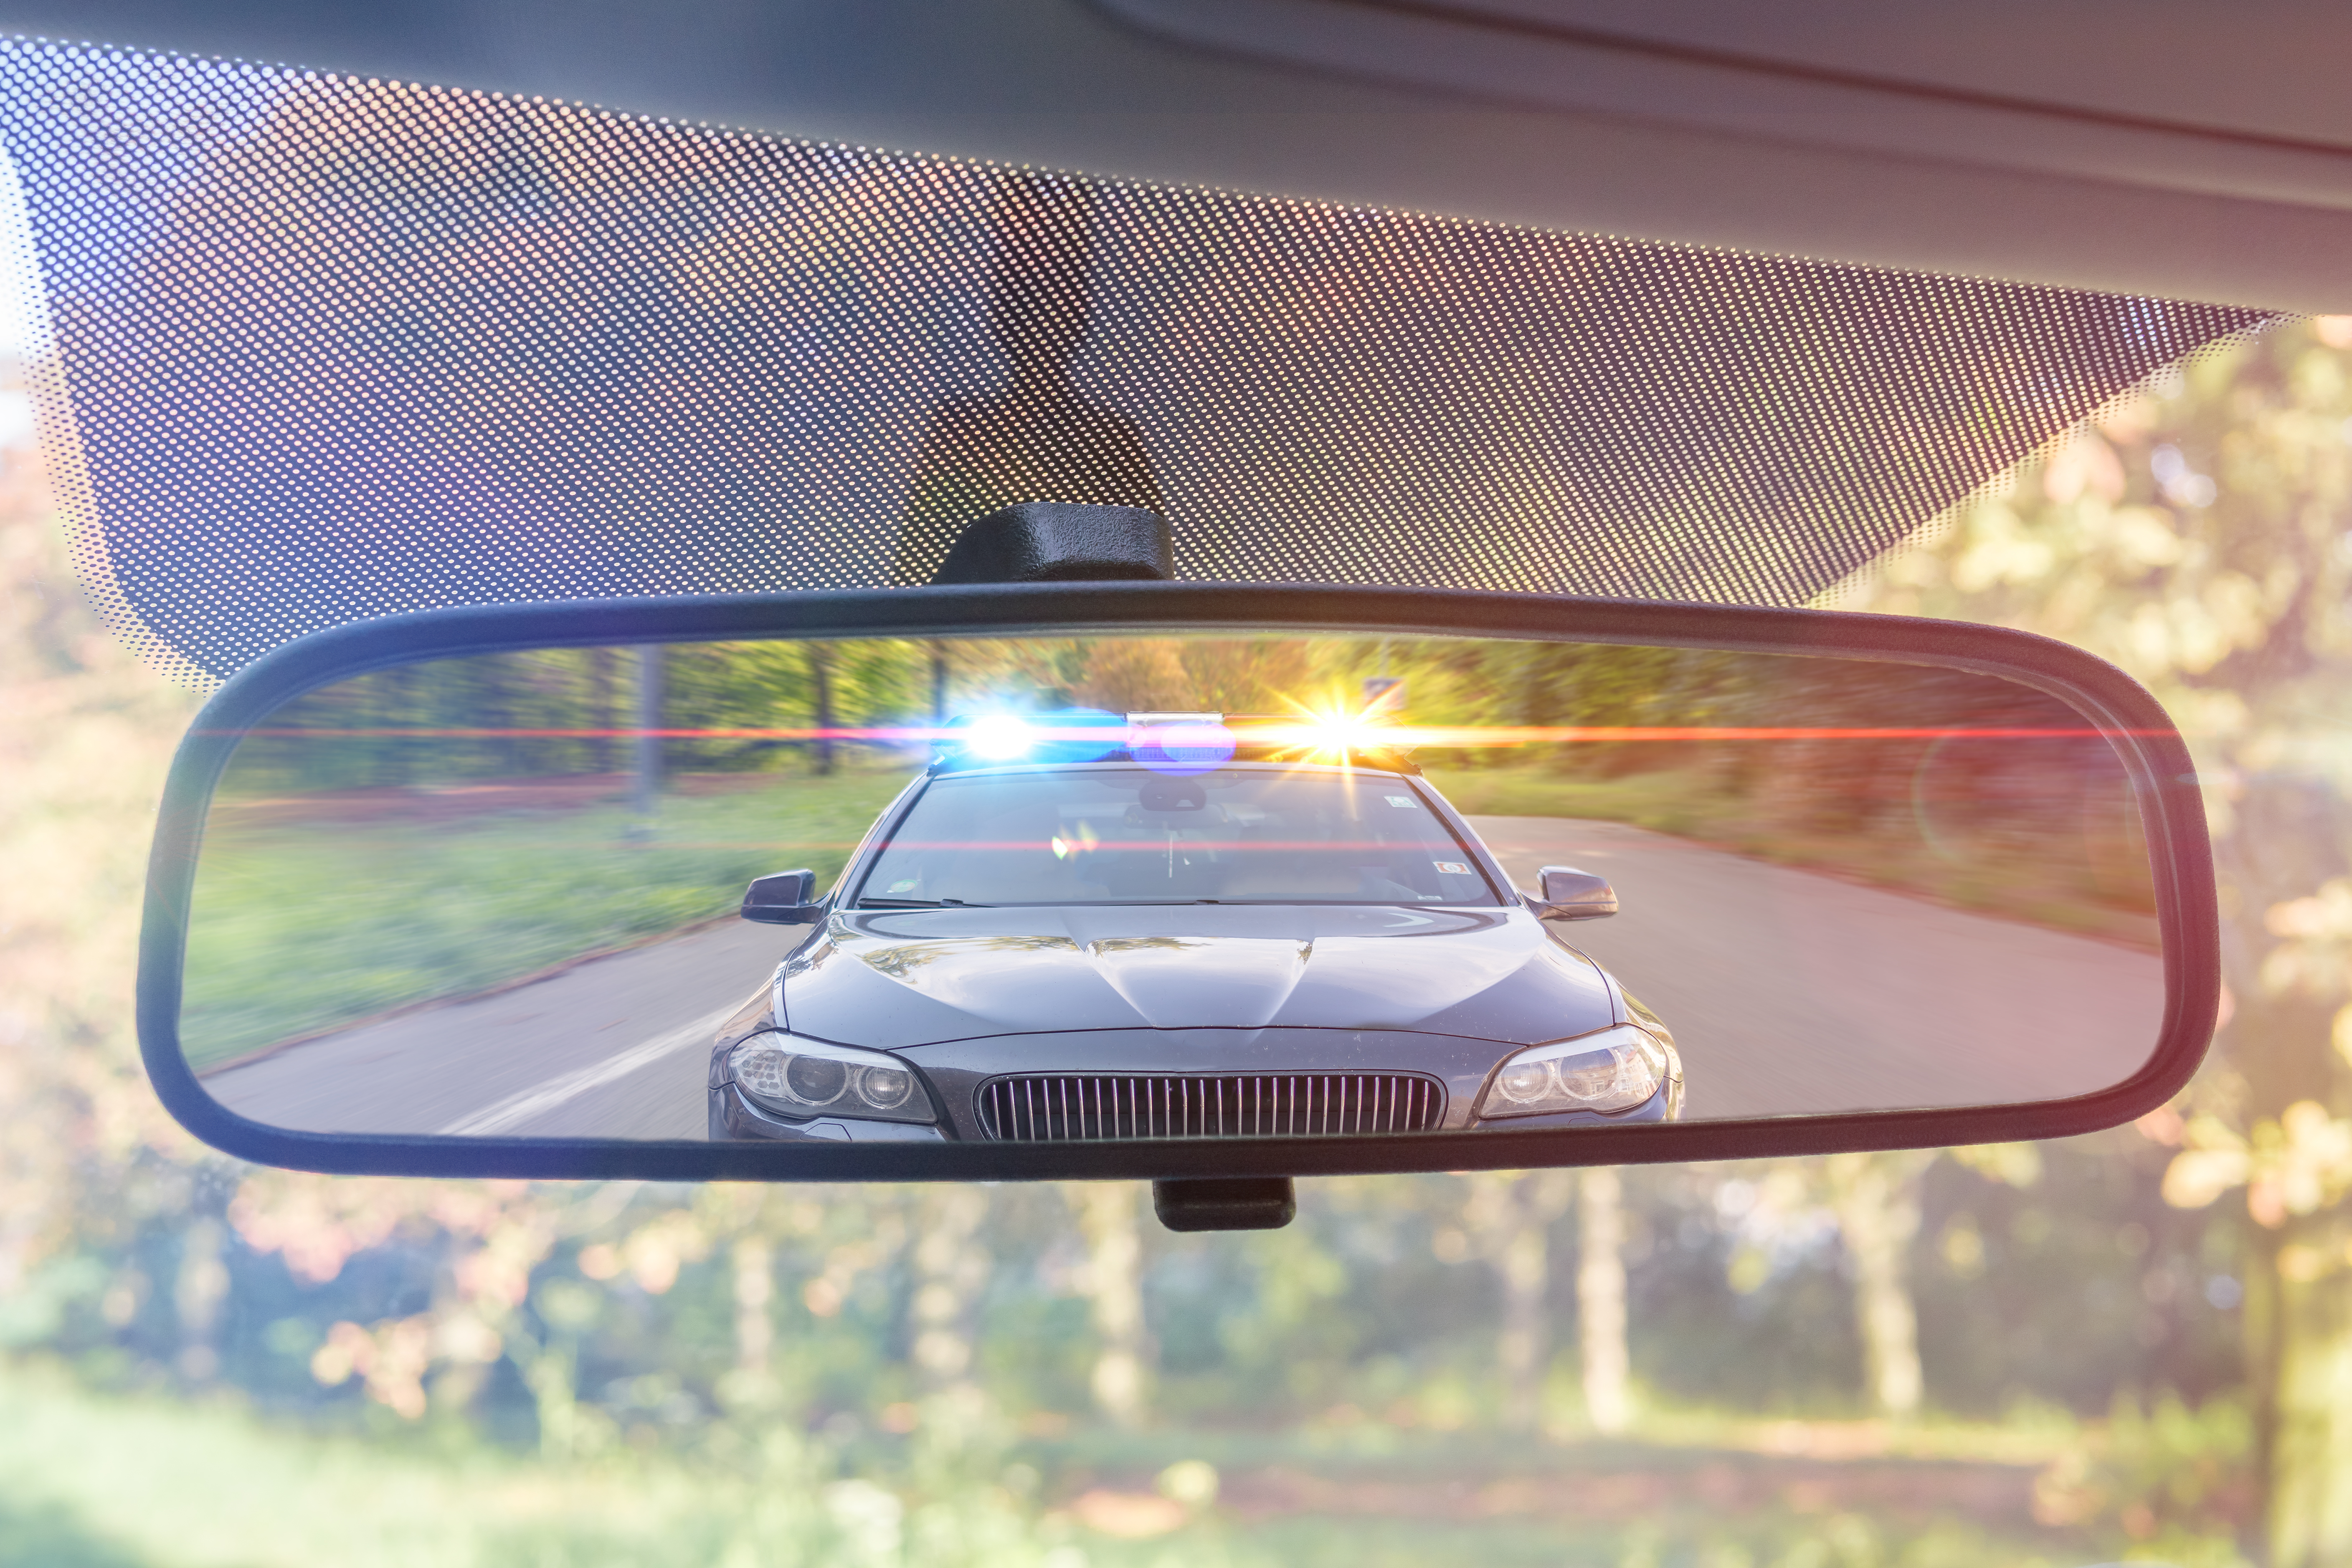 View on rear mirror of a car. Police car with lights and siren is chasing you. | Source: Shutterstock